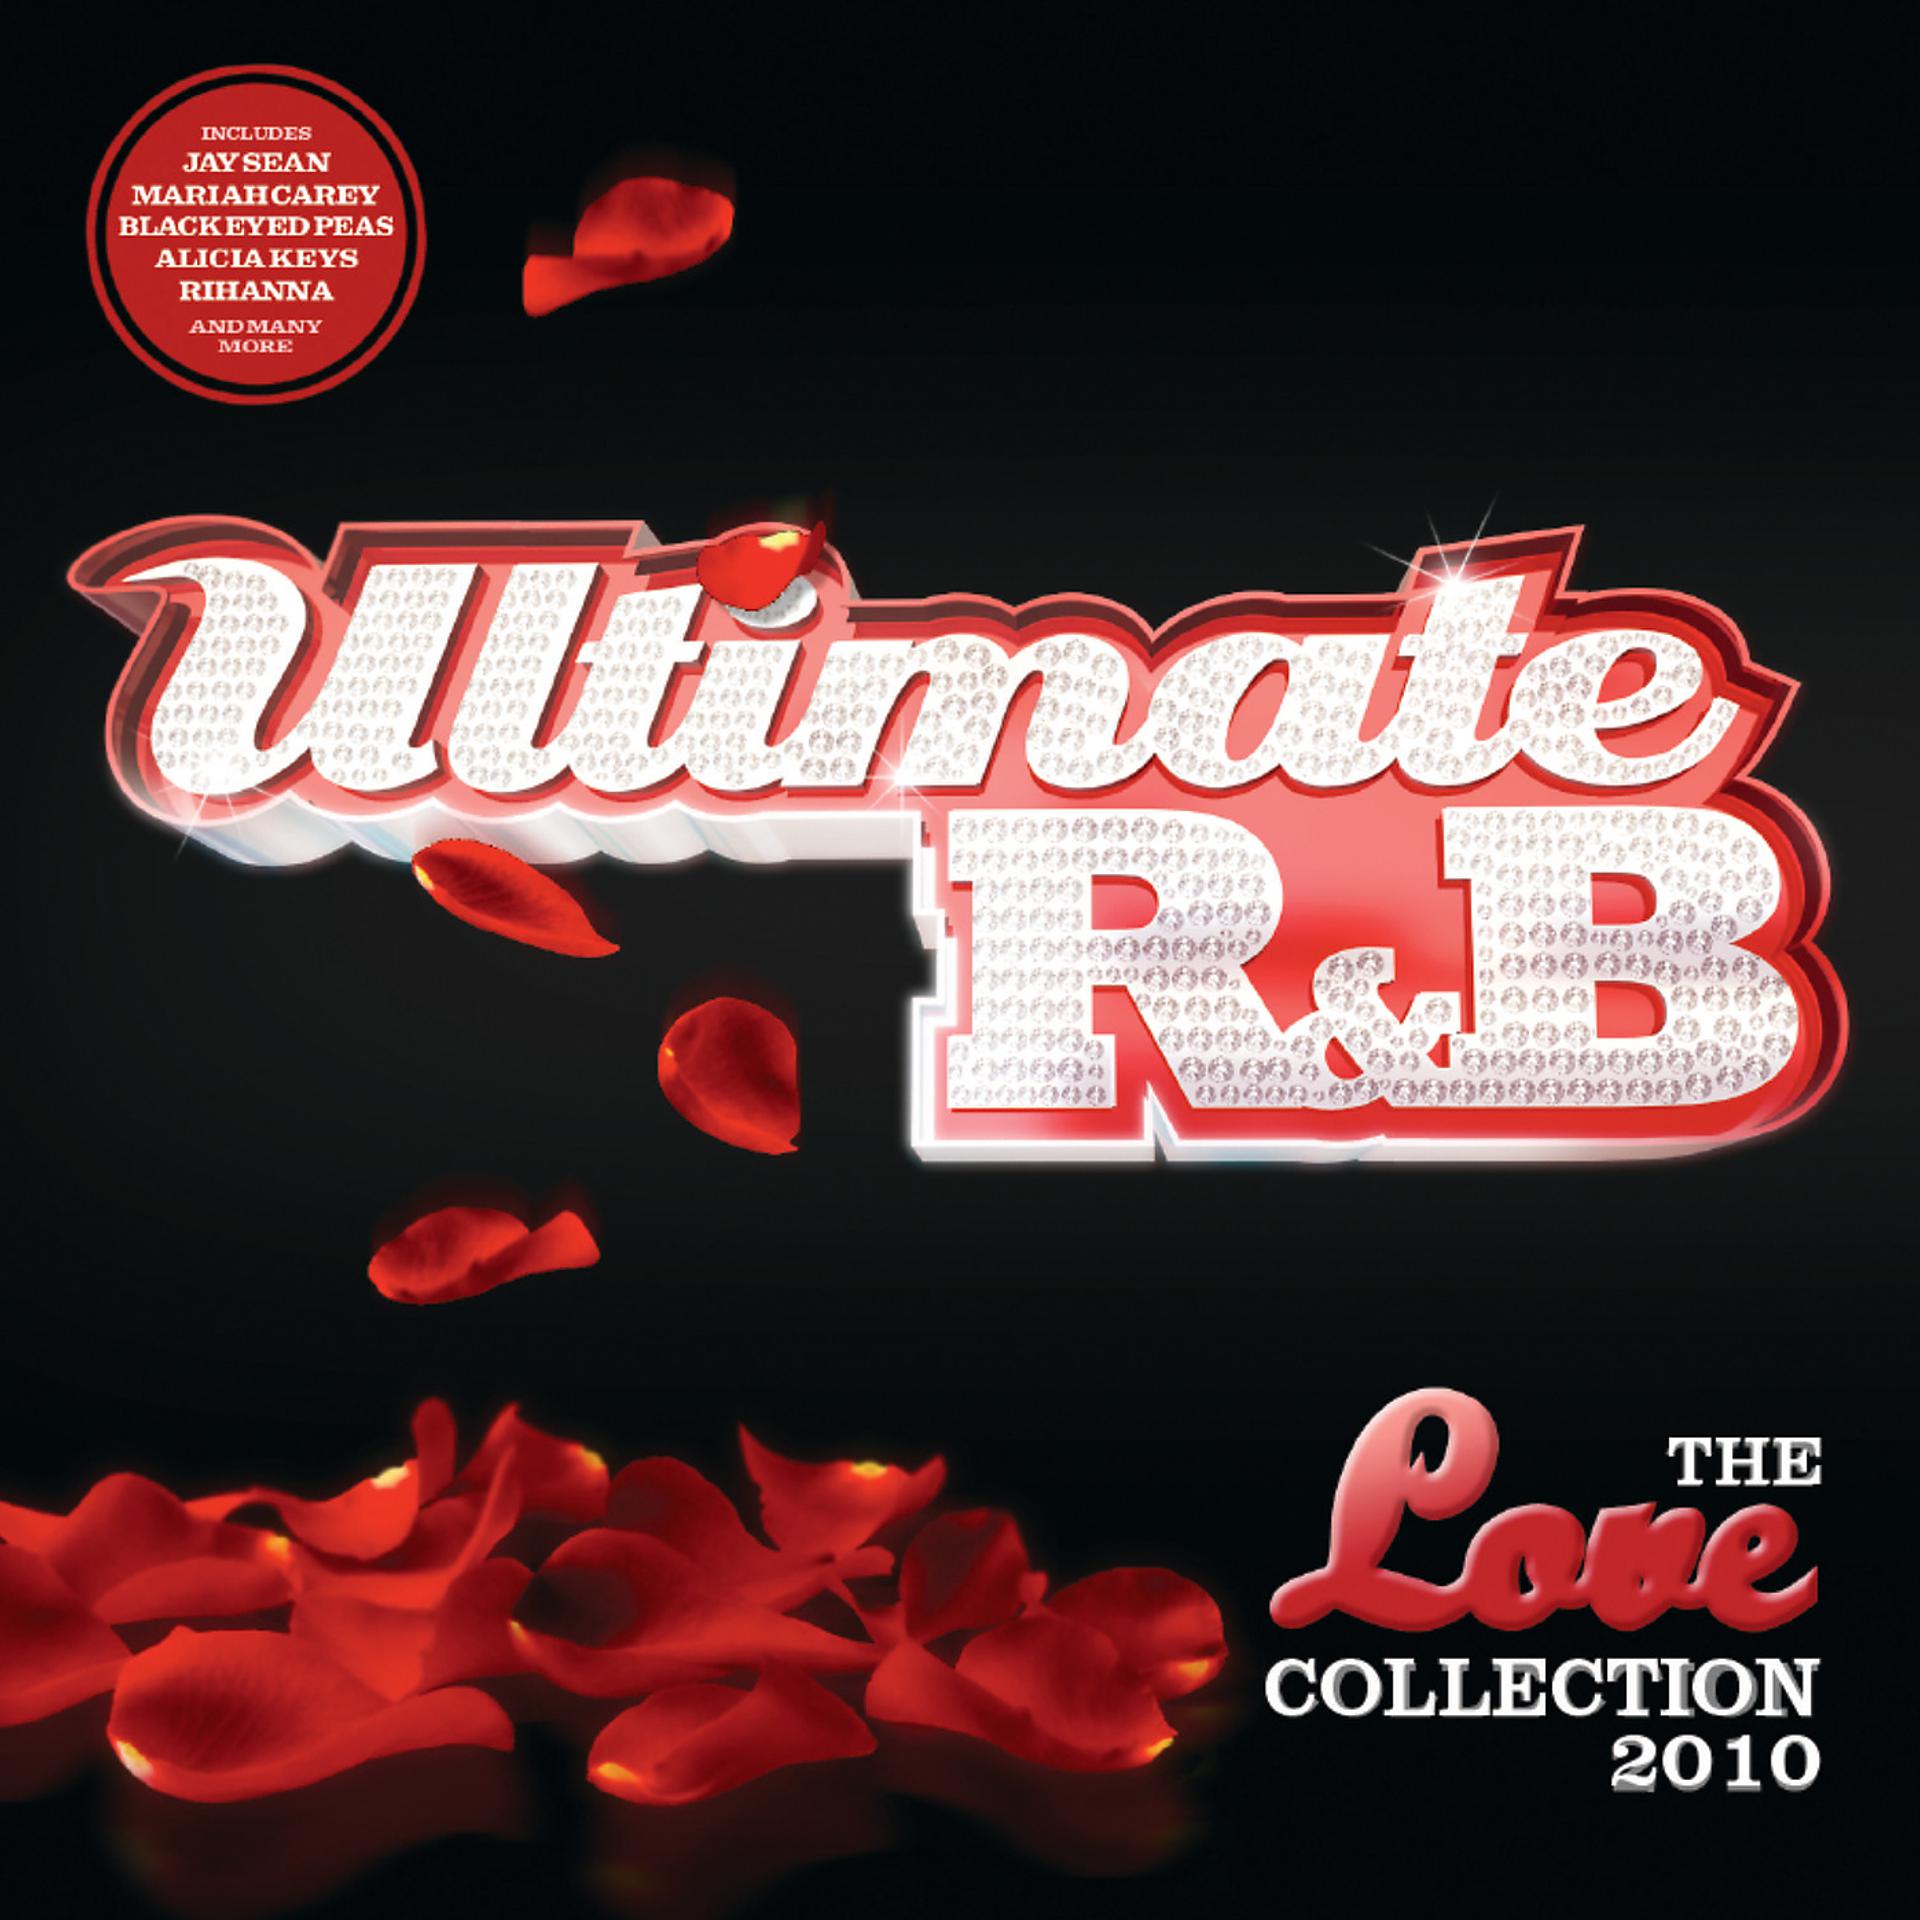 Collection 2010. R&B Ultimate. Ultimate r&b the Love collection 2010. Диск Love collection. R&B обложки.